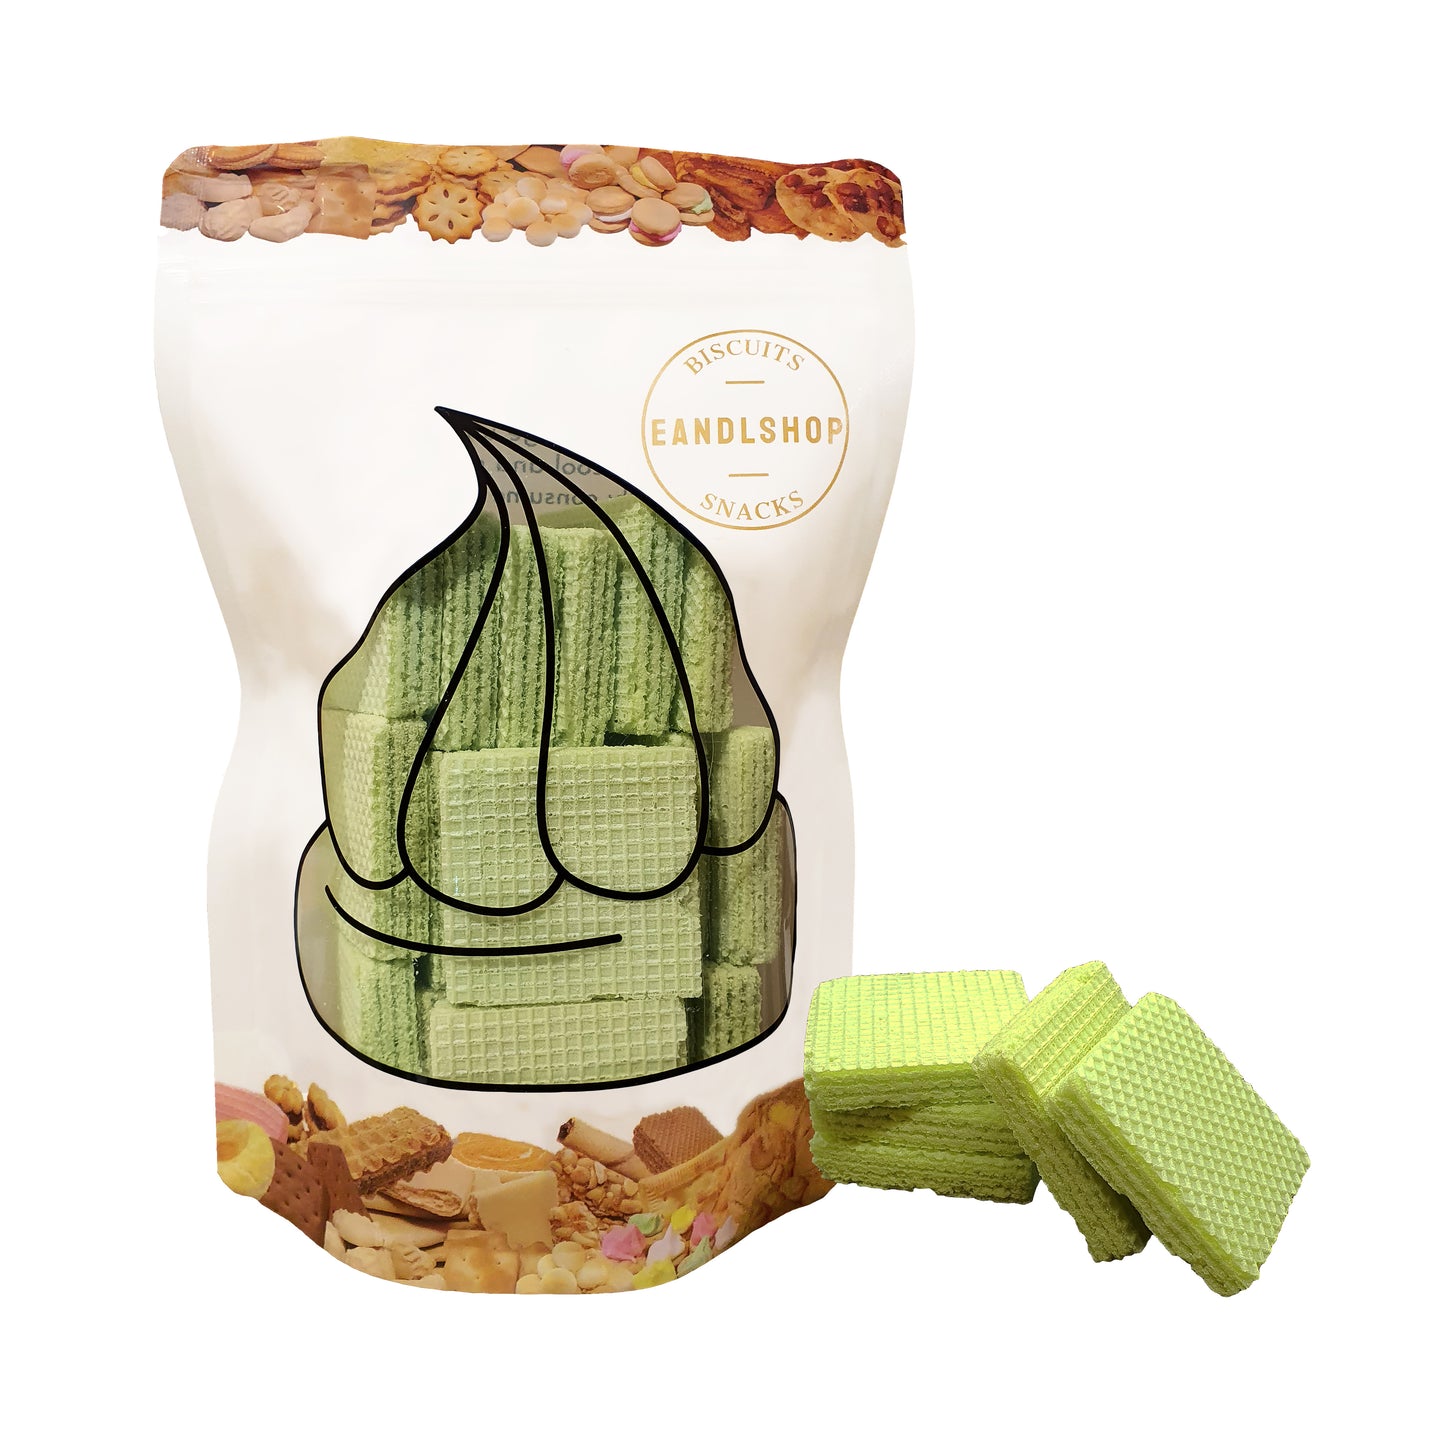 Pandan Wafer (Square). Old-school biscuits, modern snacks (chips, crackers), cakes, gummies, plums, dried fruits, nuts, herbal tea – available at www.EANDLSHOP.com